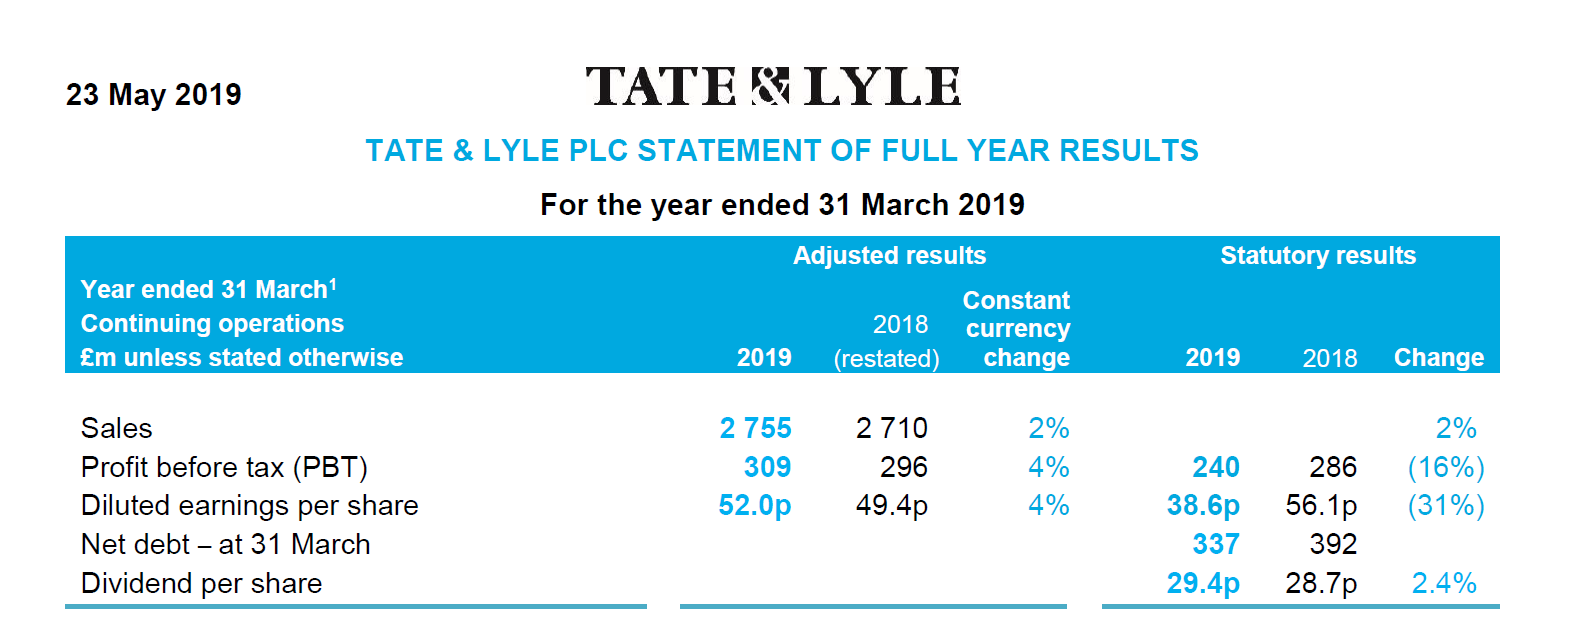 FY19 statement of full year results